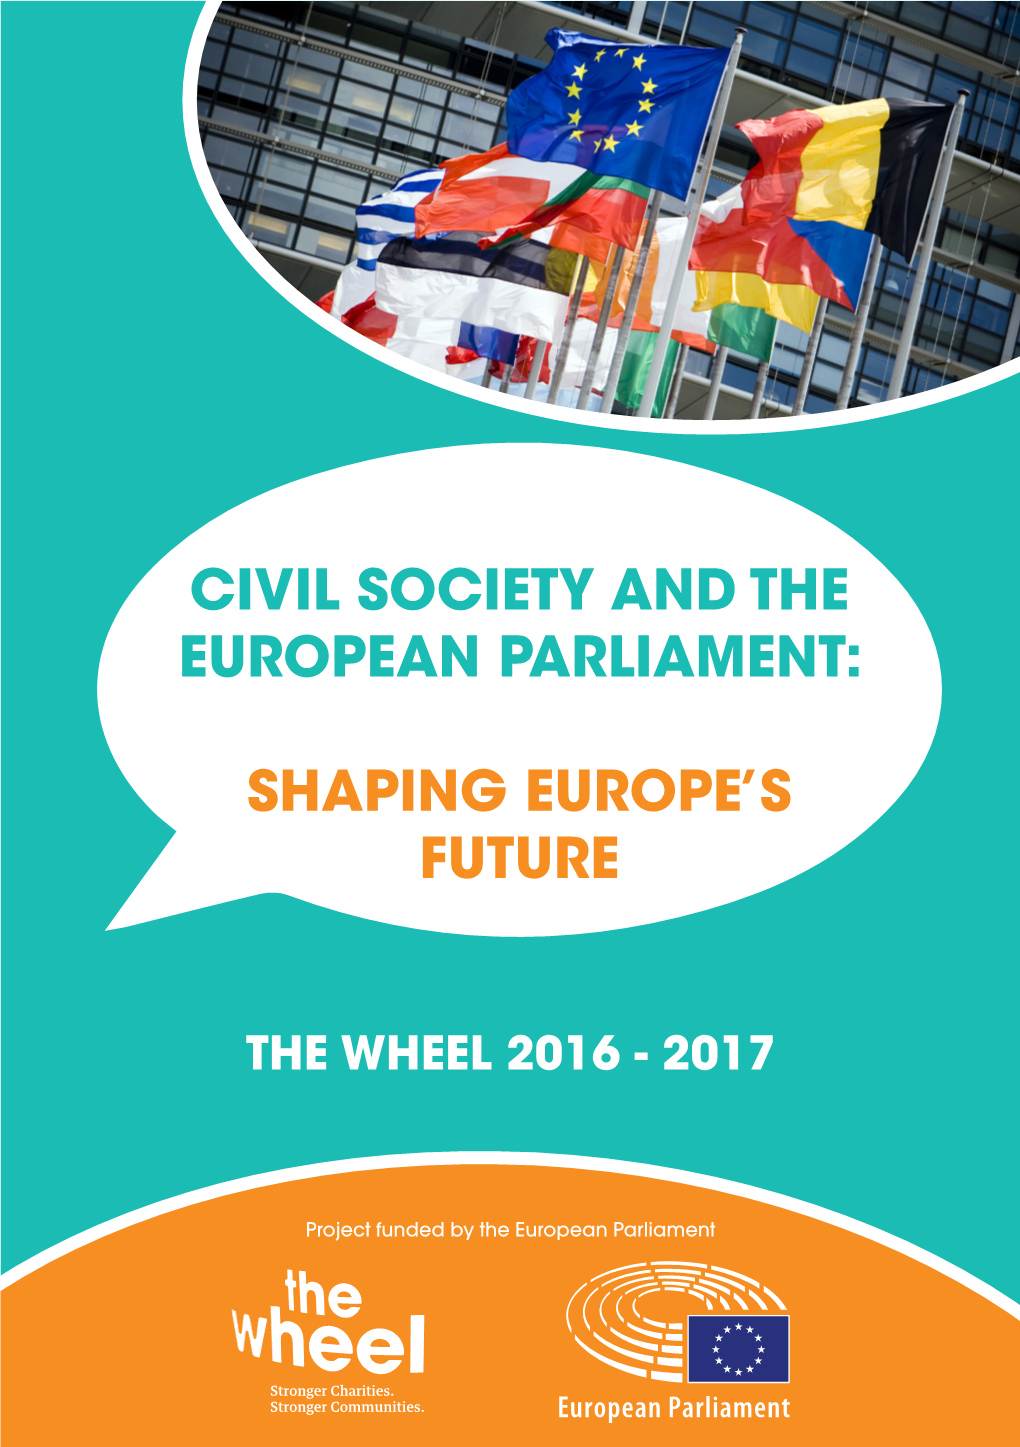 Civil Society and the European Parliament: Shaping Europe's Future